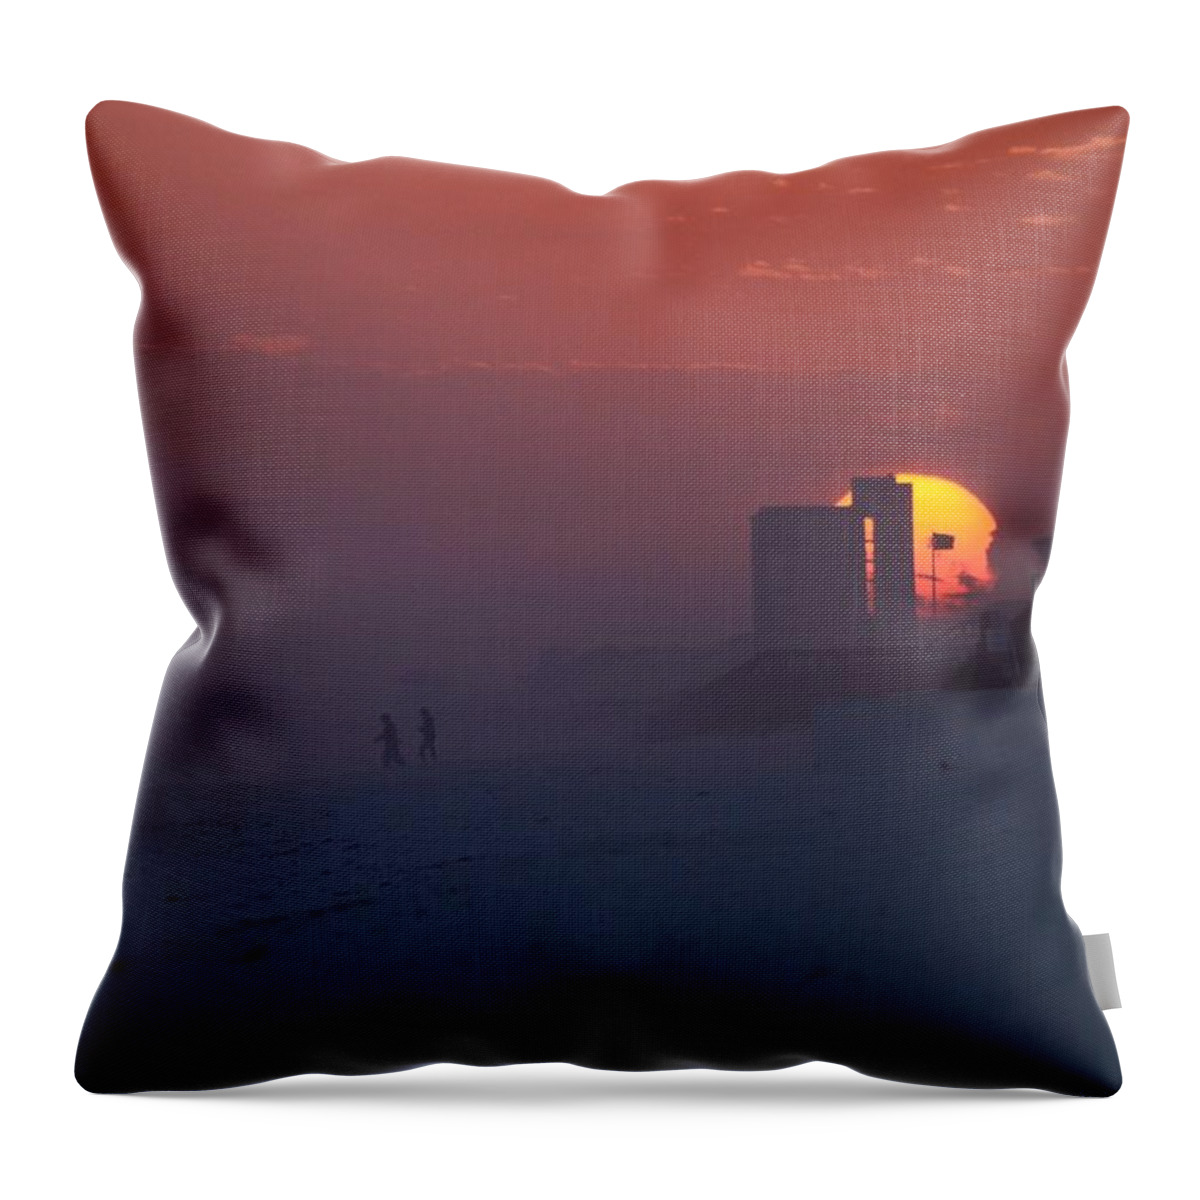 20120229 Cloudy Throw Pillow featuring the photograph 0229 Red Orange Sunset Ball Behind Navarre Beach Condo by Jeff at JSJ Photography